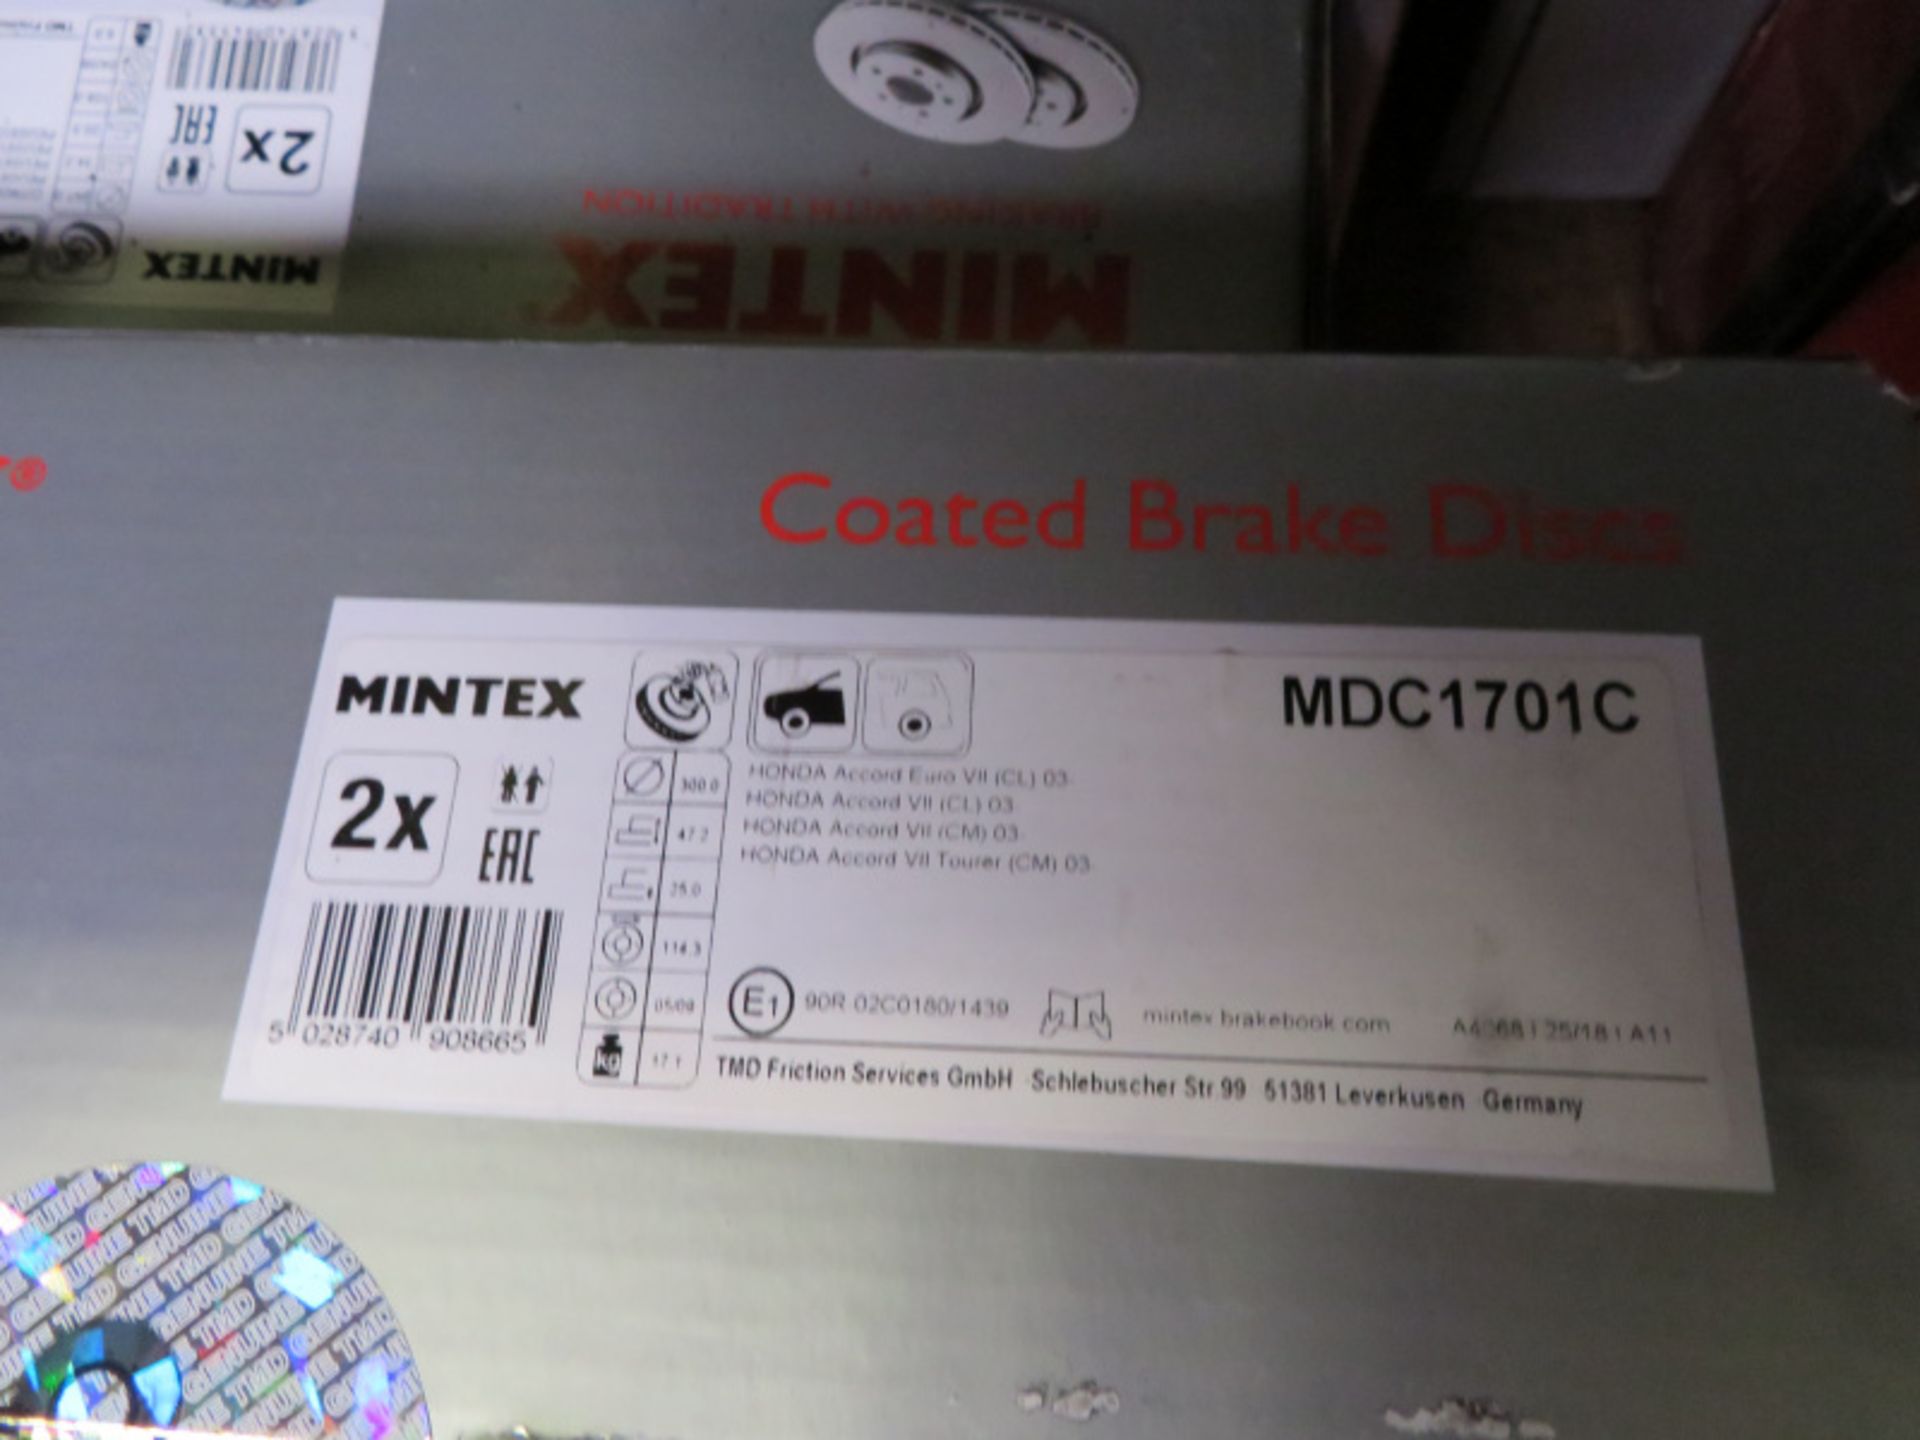 Vehicle parts - Mintex, Bosch, Pagid - see pictures for models and types - Image 3 of 4